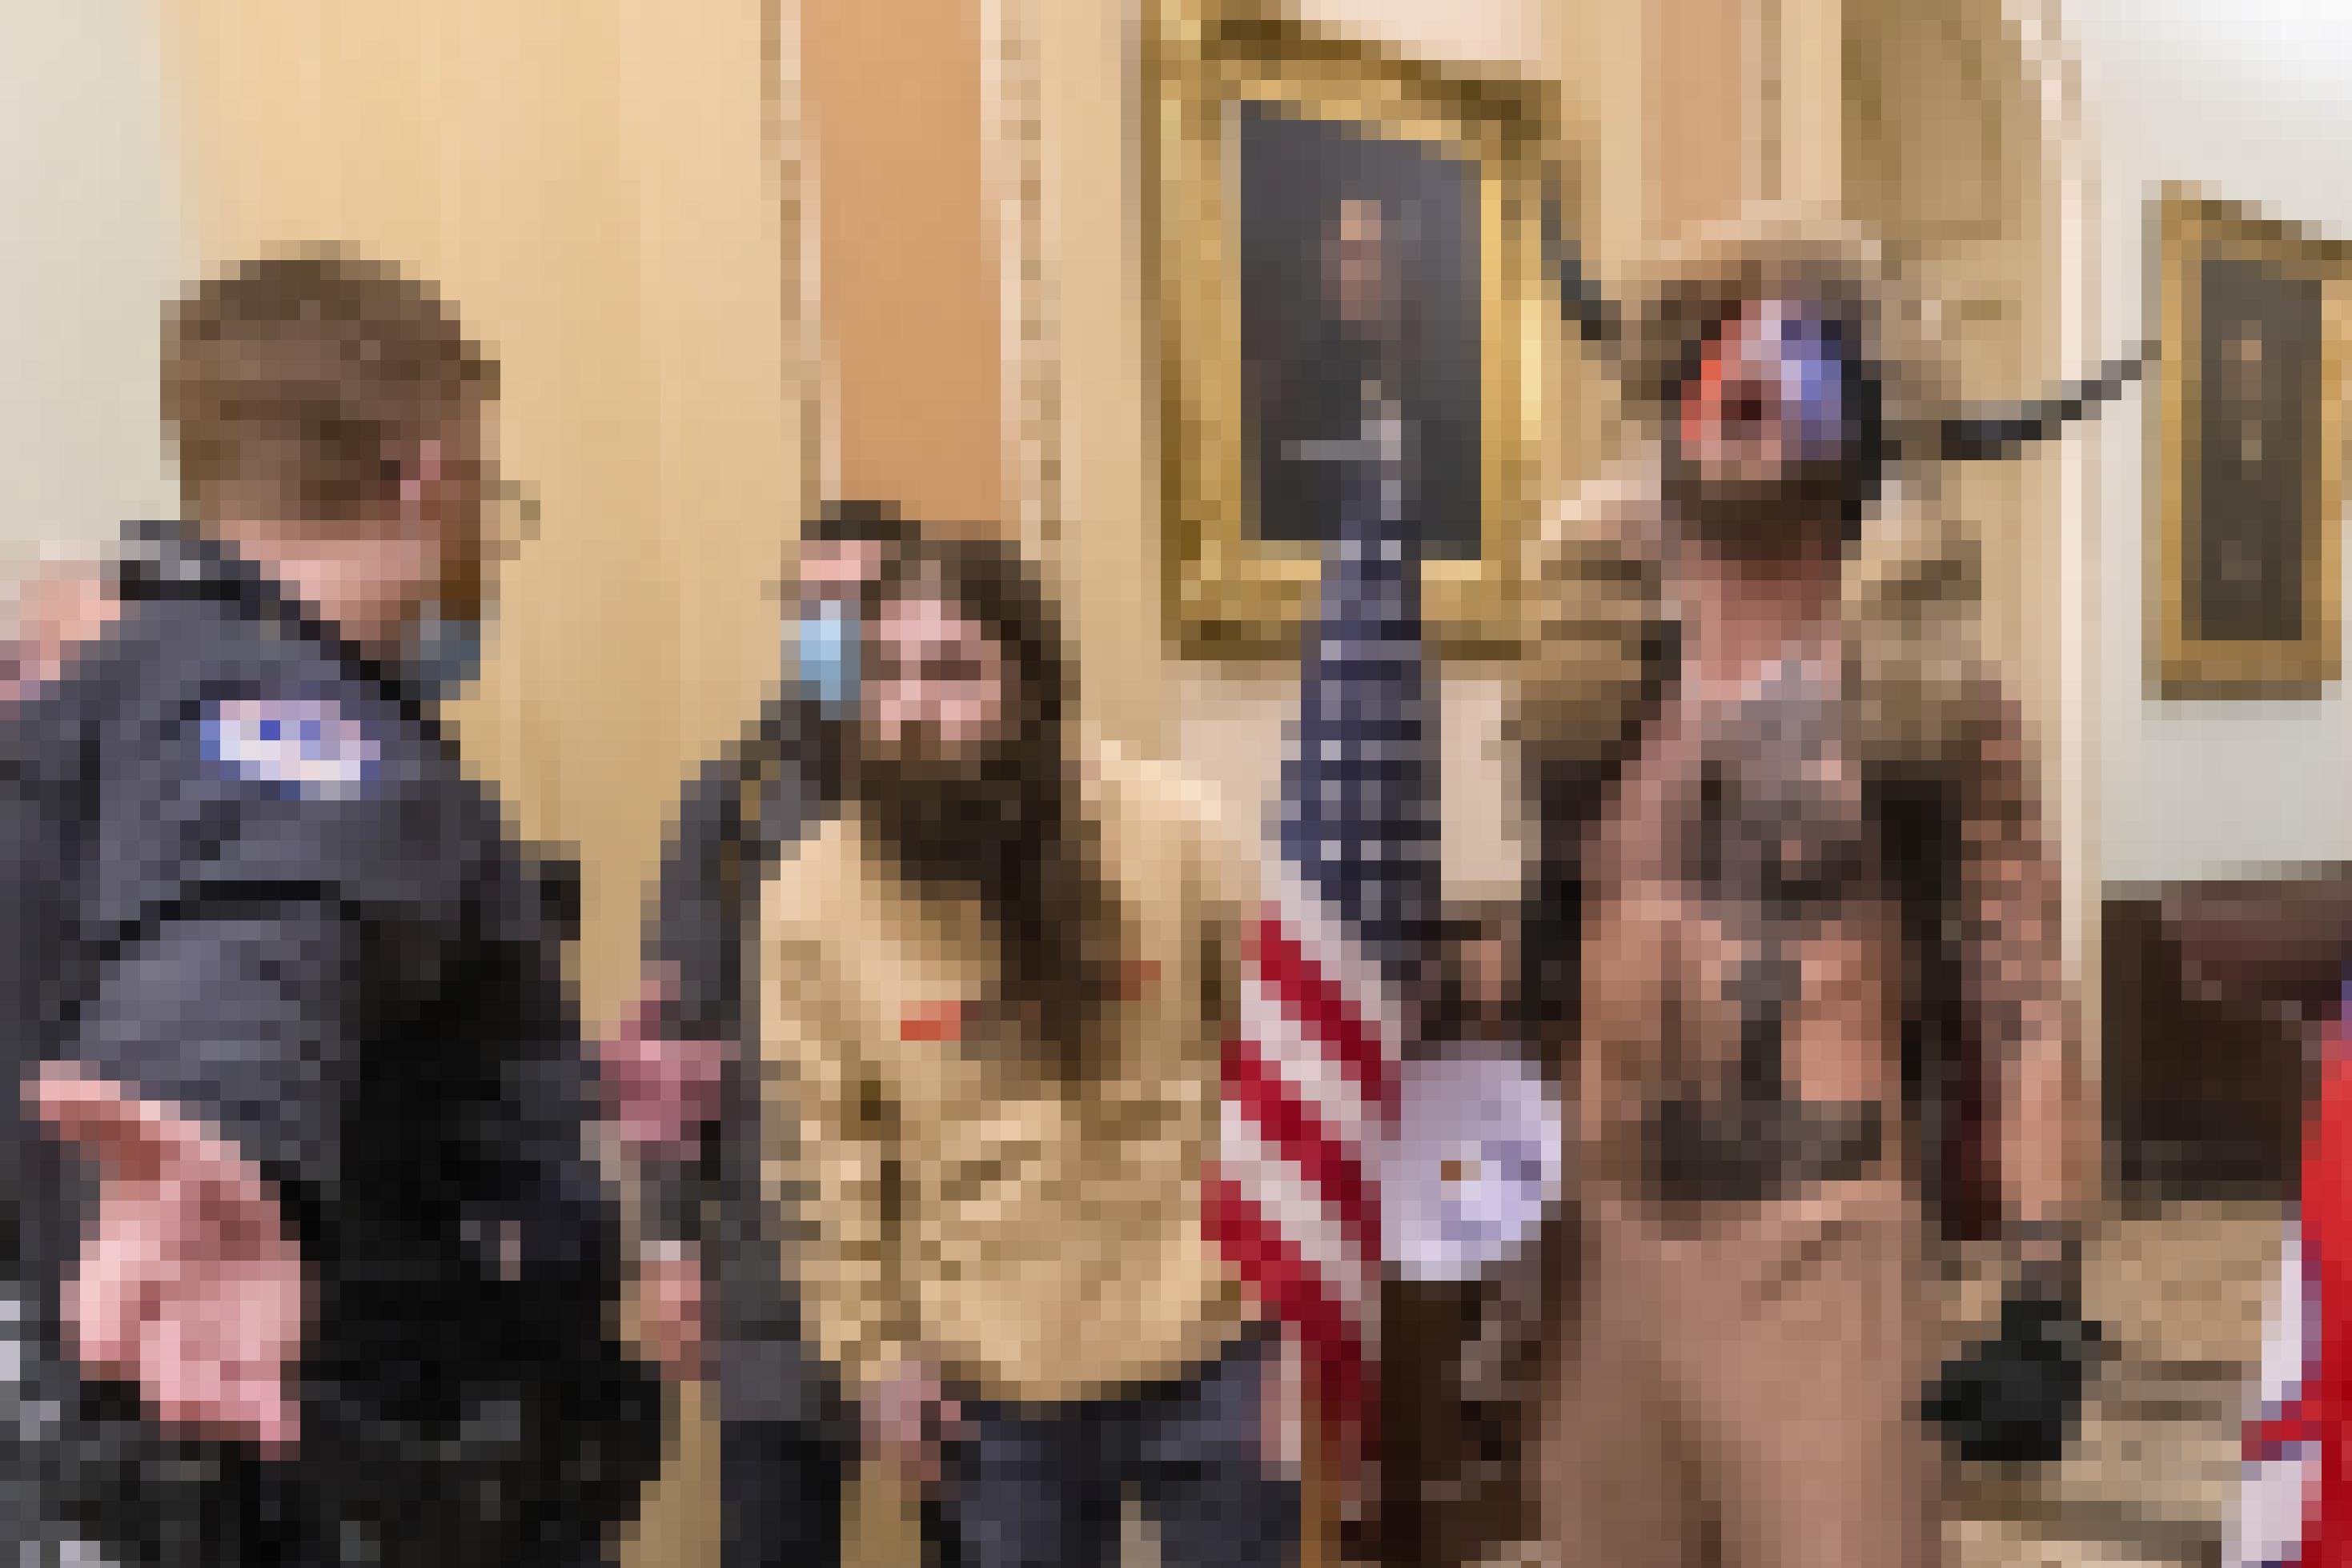 In this Jan. 6, 2021, file photo, is Jacob Chansley, right with fur hat, during the Capitol riot in Washington. Chansley pleaded guilty on Friday, Sept. 3, 2021, to a felony obstruction charge. He carried a flagpole topped with a spear into the insurrection, yelled into a bullhorn as officers tried to control the crowd, posed for photos on the Senate dais and wrote a note to then-Vice President Mike Pence that prosecutors have said was threatening. (AP Photo/Manuel Balce Ceneta, File)